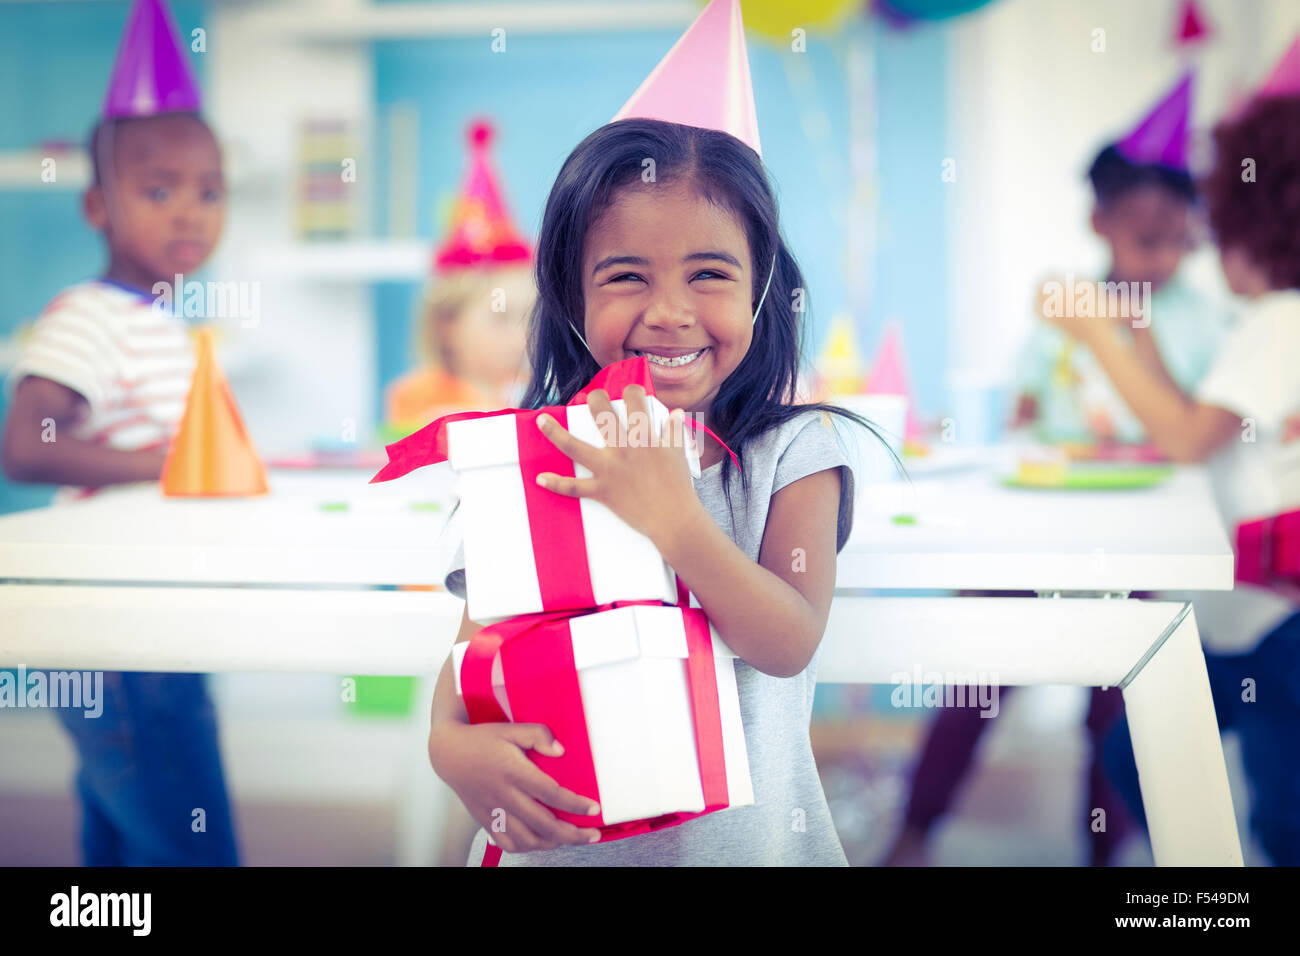 Smiling girl at birthday party Stock Photo